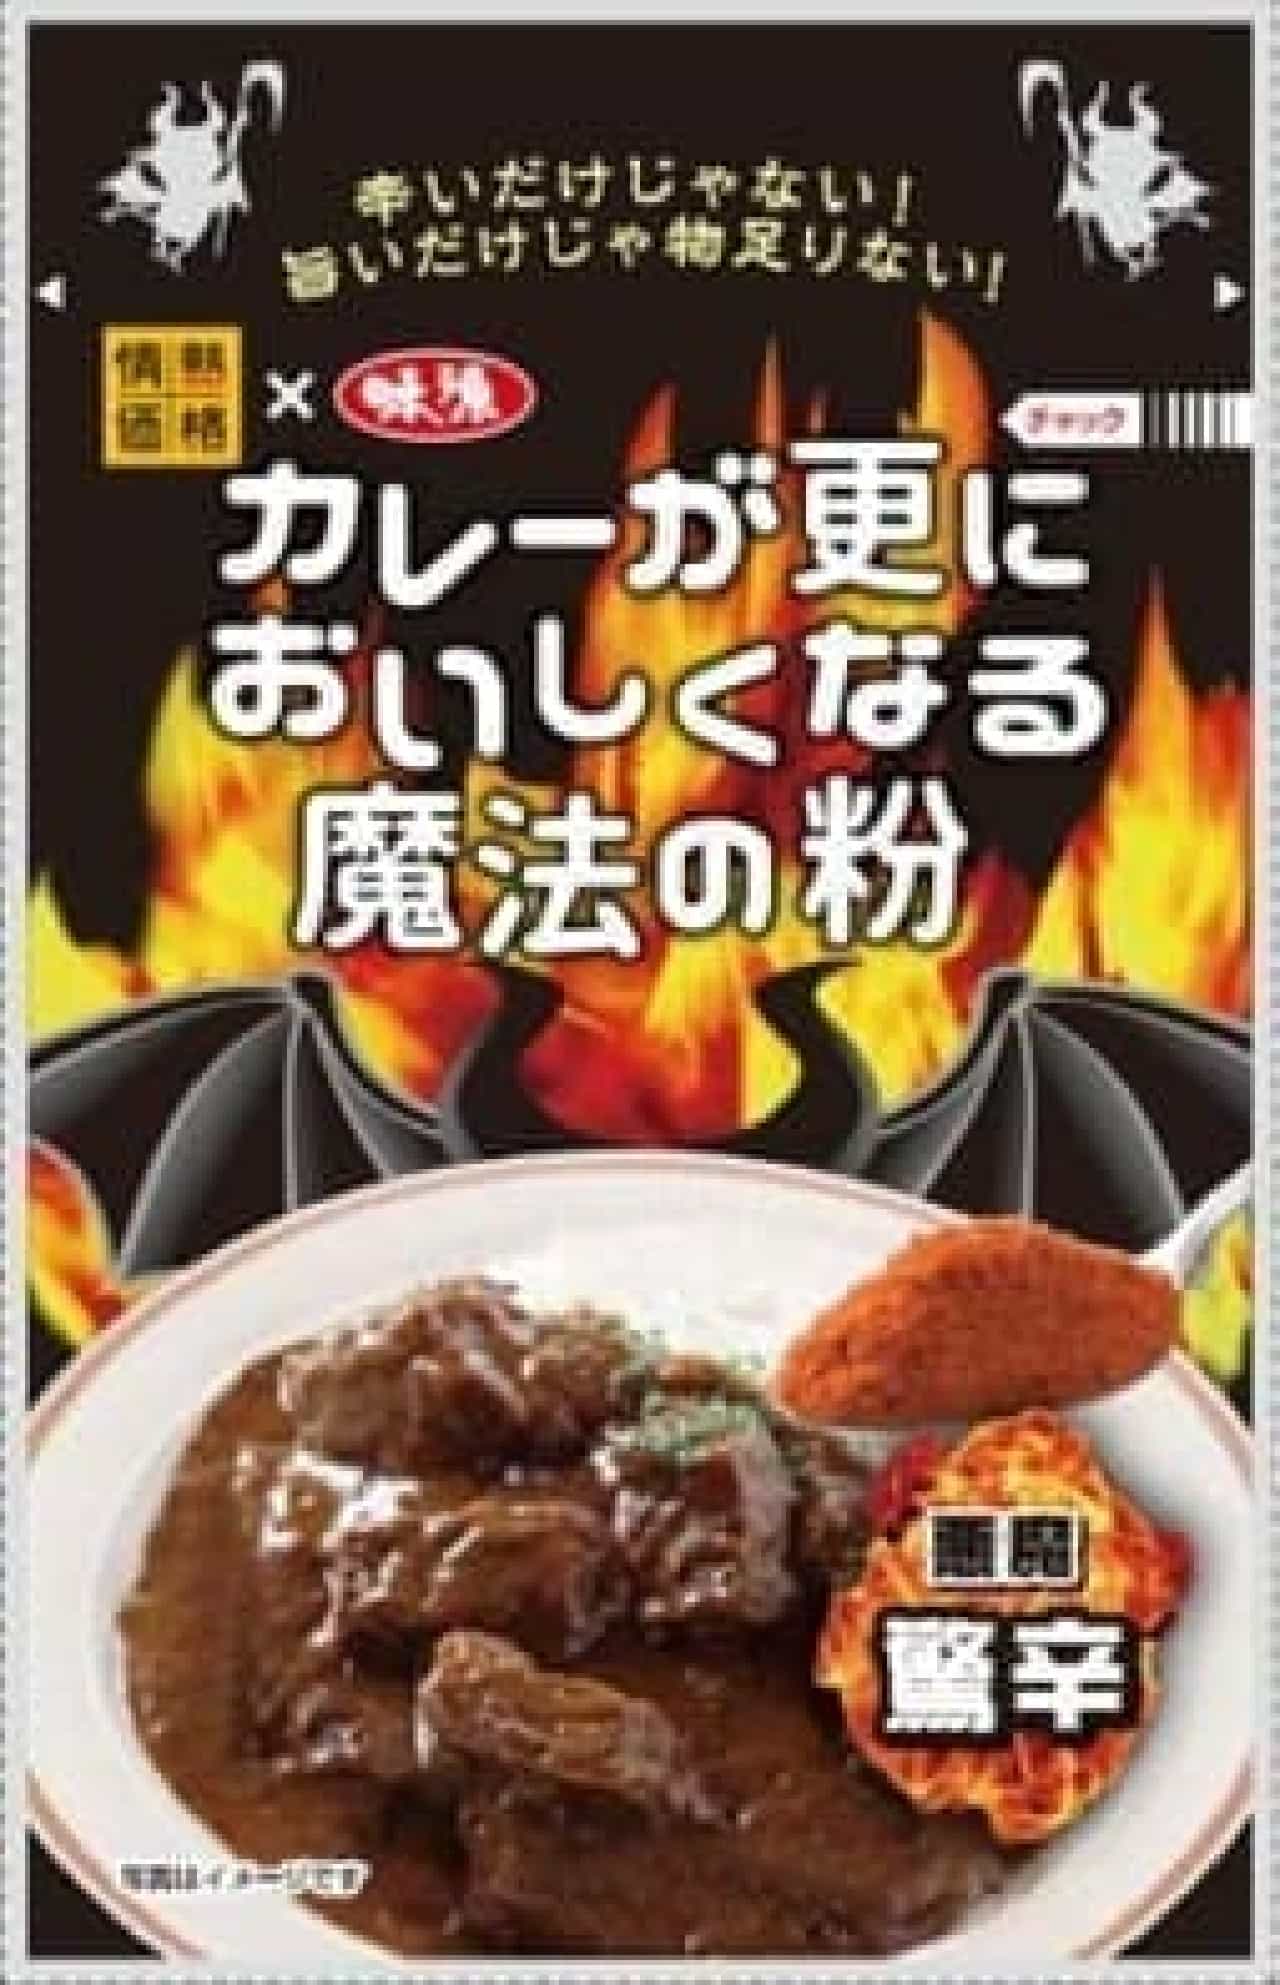 For those who want to eat spicy curry anyway